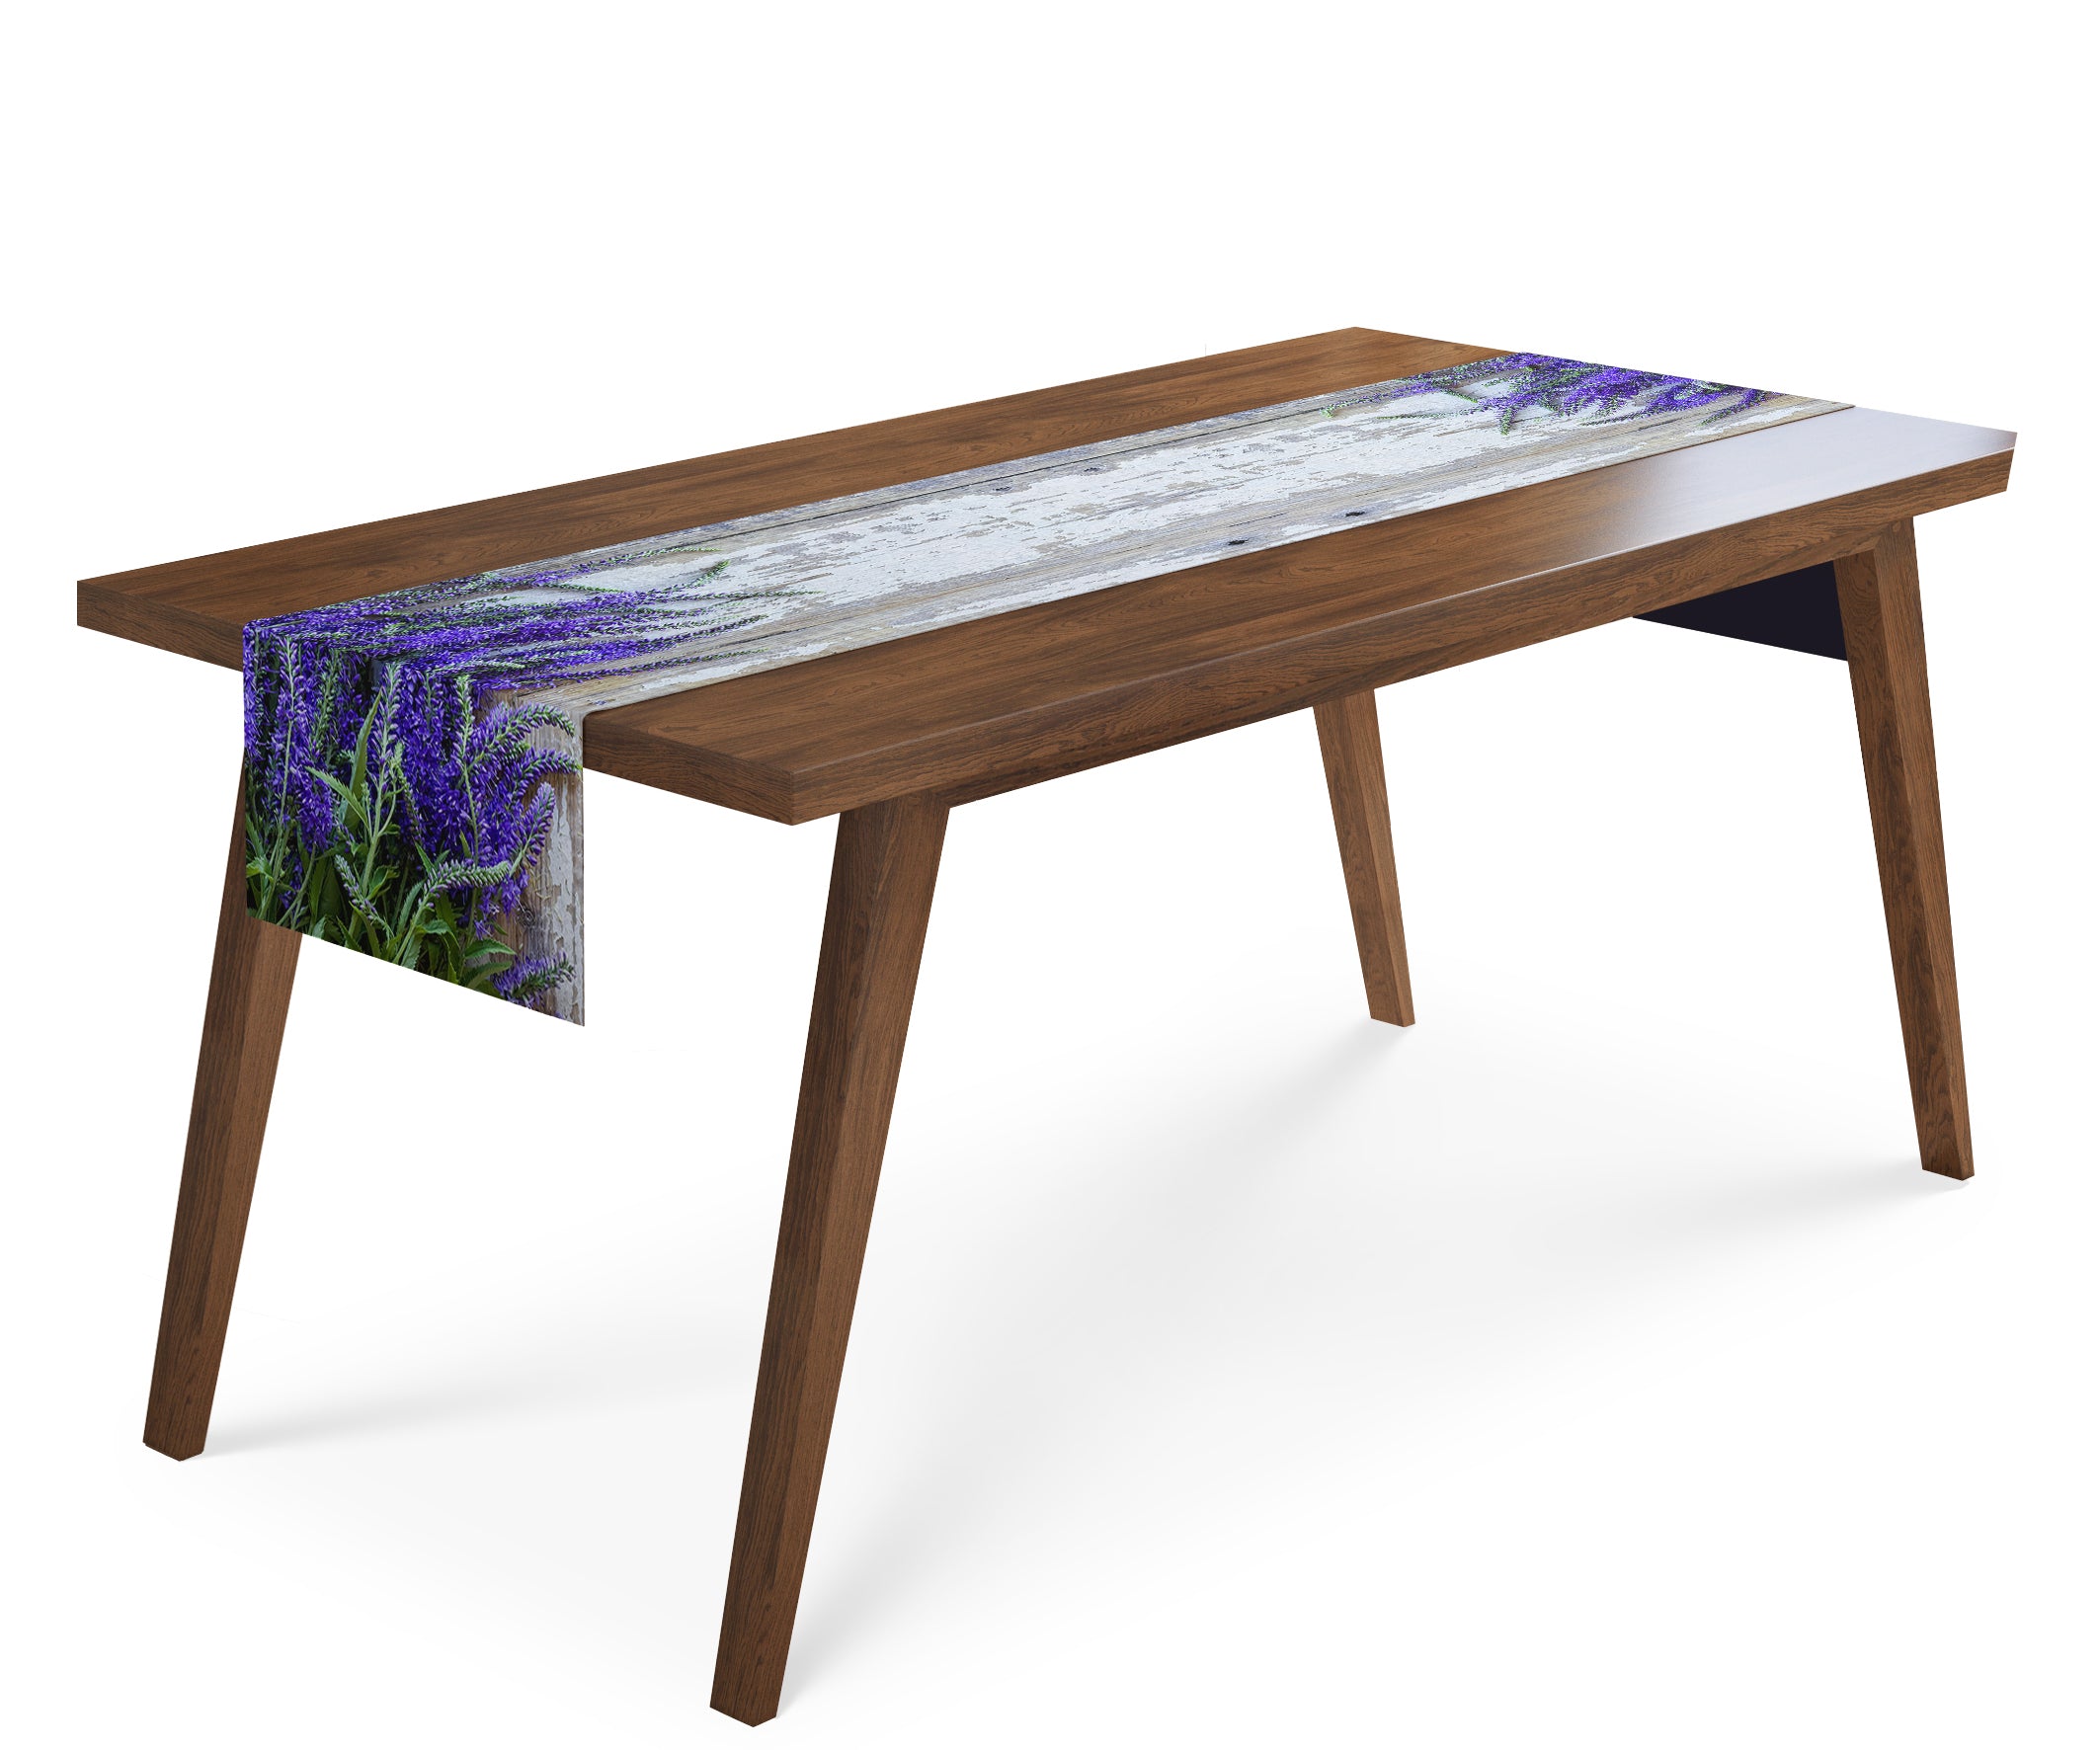 Table Runner Lavender on the wood - Wellmira